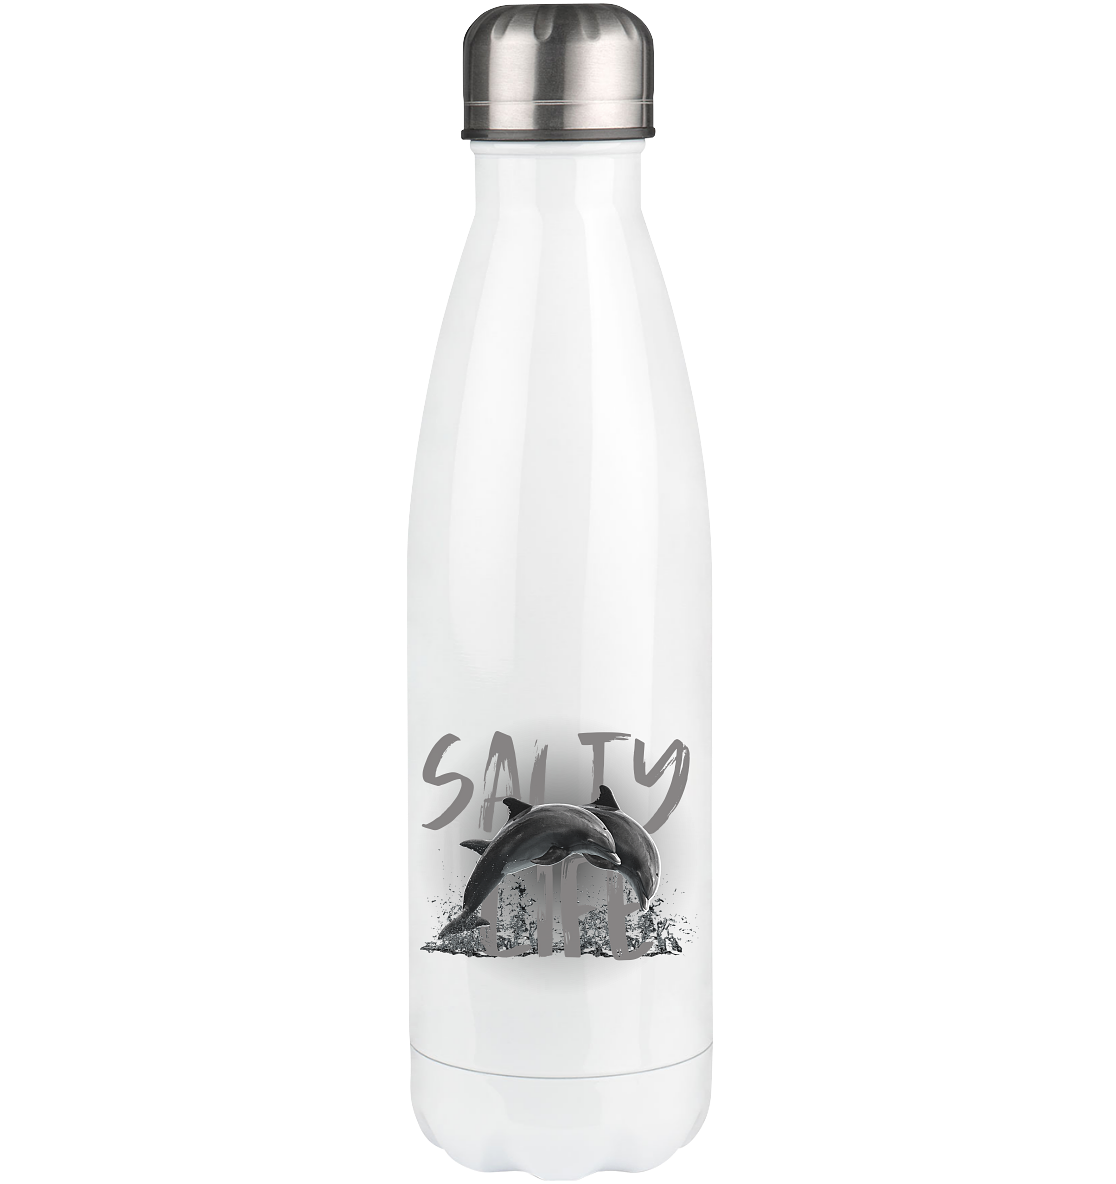 Salty Life "Dolphins" - Thermoflasche 500ml